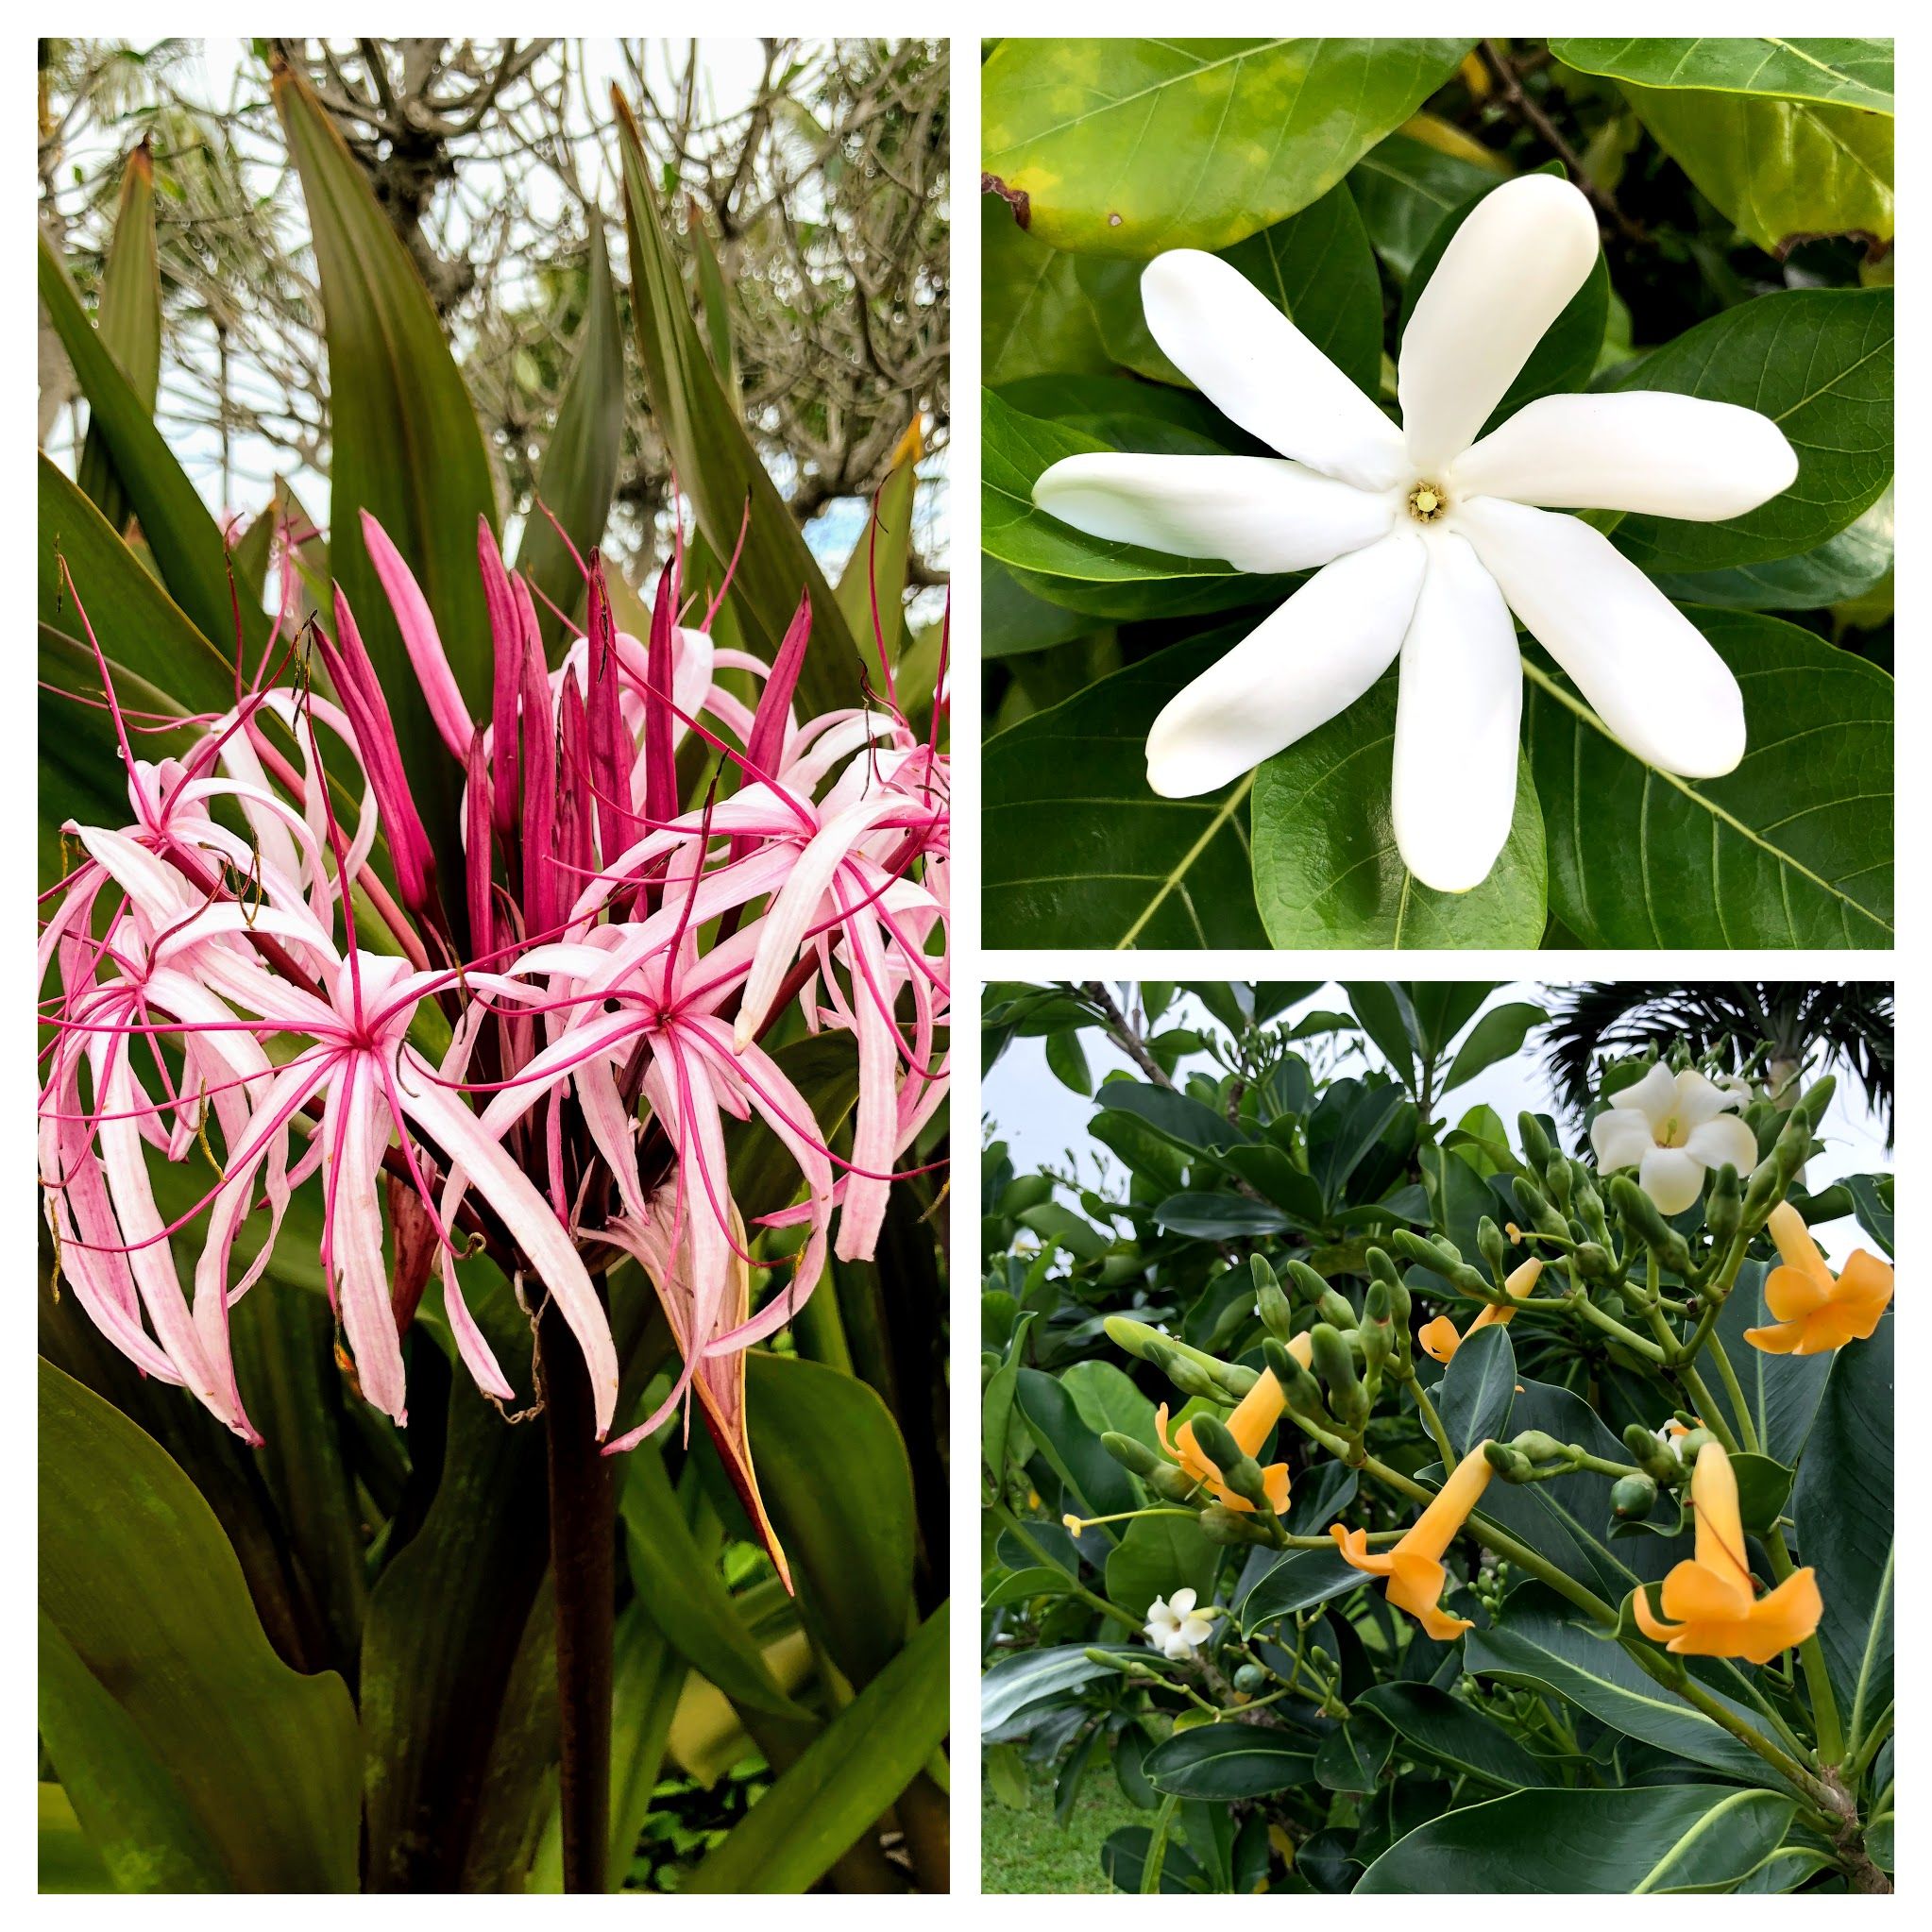 Caption: Some of the fragrant blossoms  (Clockwise:  called Juhi (Jasminum auriculatum), Pua keni keni (Fagraea berteriana), and Queen Emma Lily (Crinum augustum) )that can be found in Hawaii. Not necessarily native, but can be easily grown in Hawaii's perfect tropical climate. Photo: @karenvchin